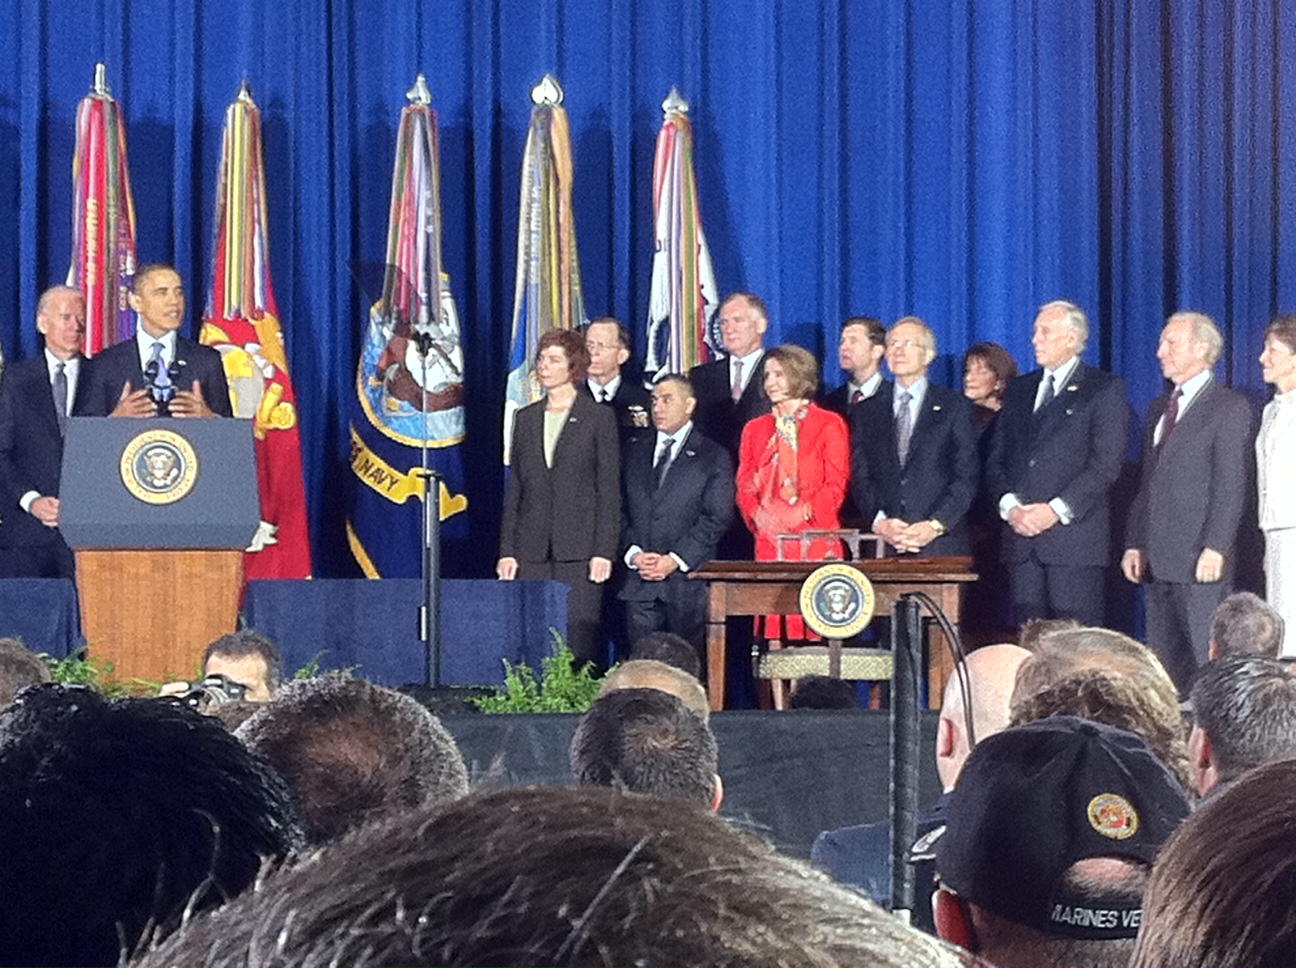 DADT Repeal Signing